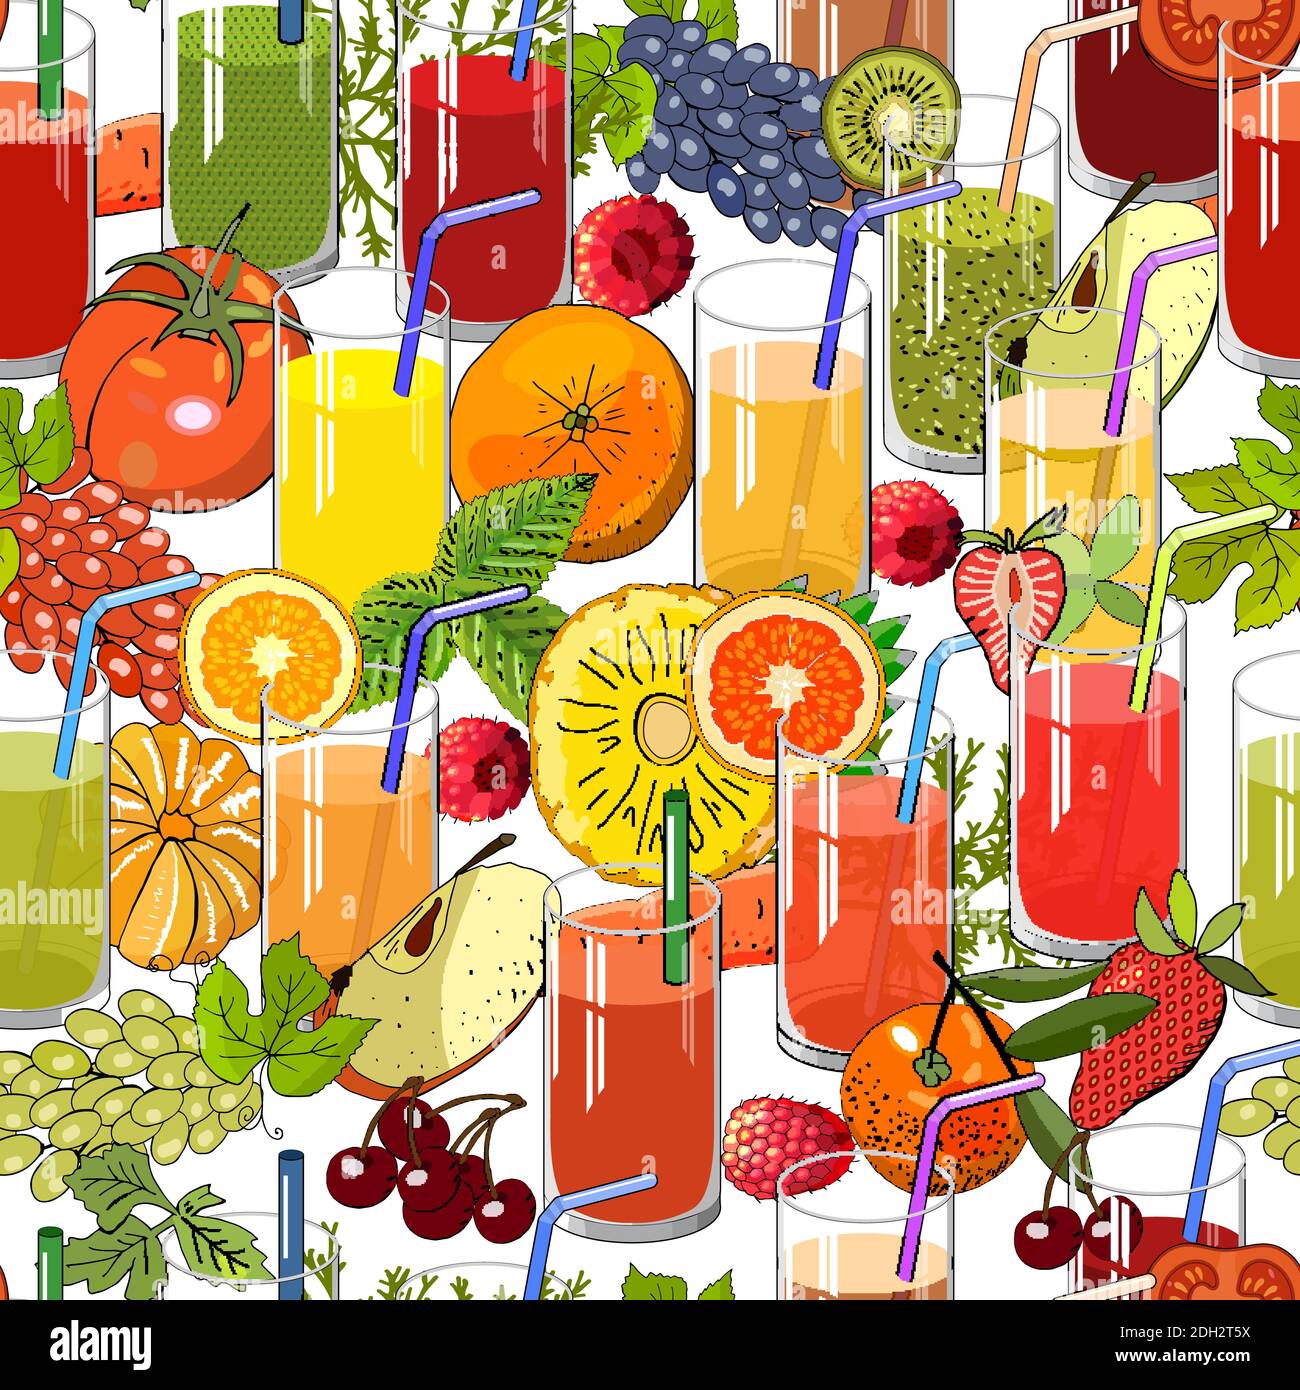 eamless pattern with natural juice and fruit. Vector endless hand drawn illustration. For your design, announcements, cards, posters, restaurant menu. Stock Vector